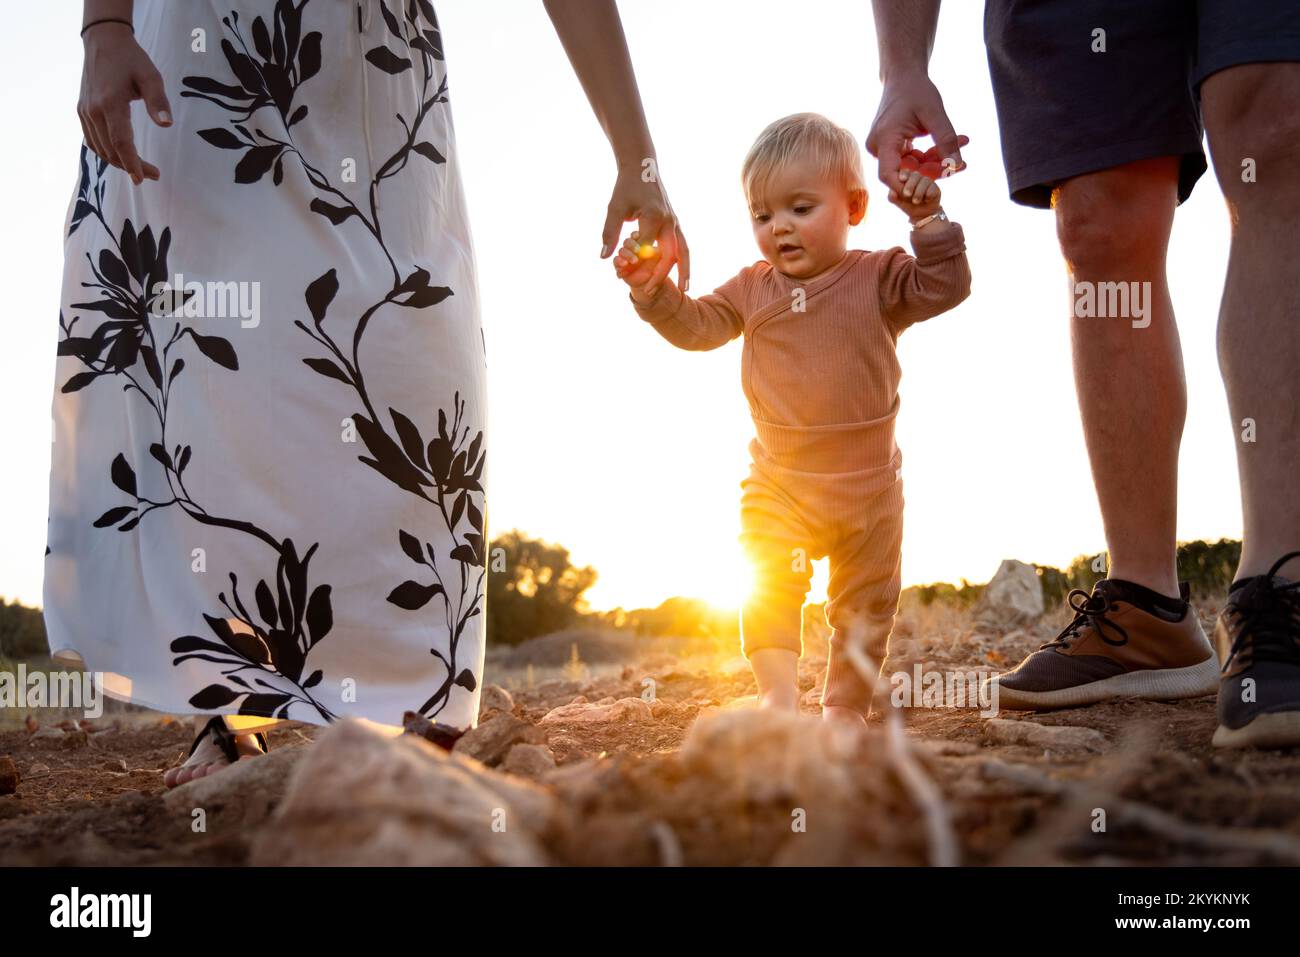 Little girl learning to walk with the help of her parents Stock Photo